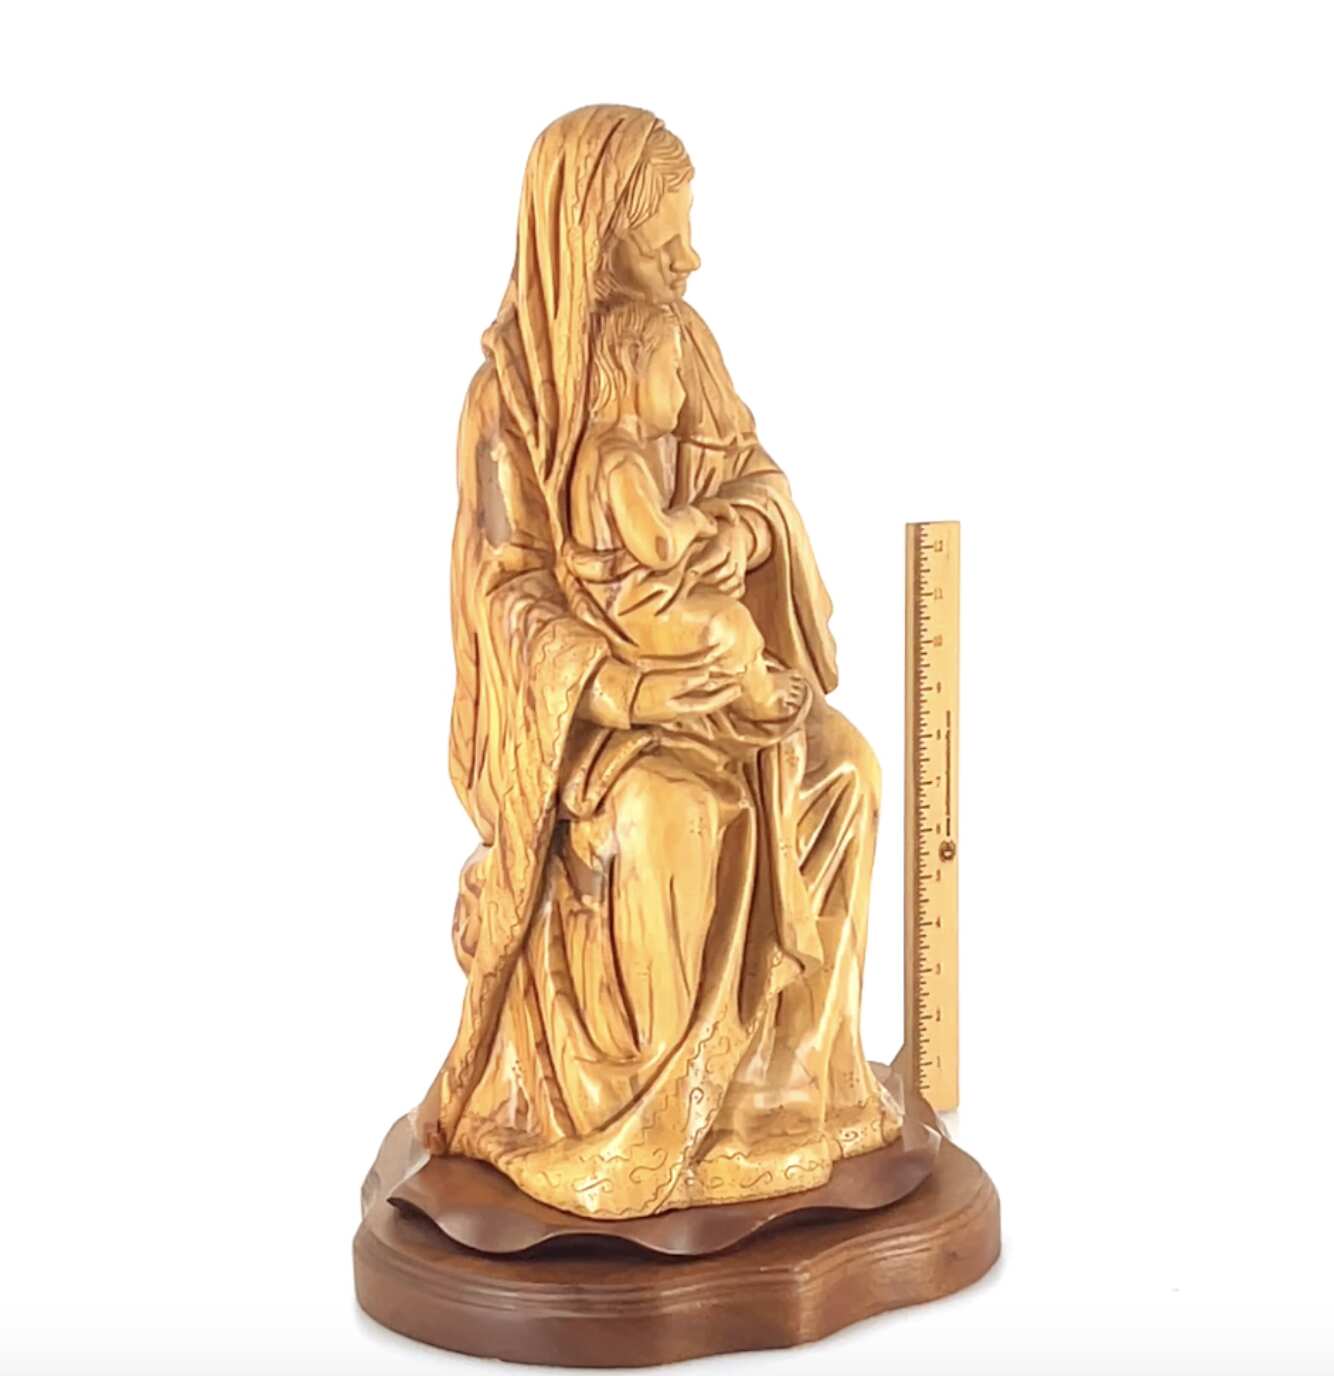 Virgin Mary Holding Sleeping Baby Jesus, 13.8" Wooden Masterpiece Carving